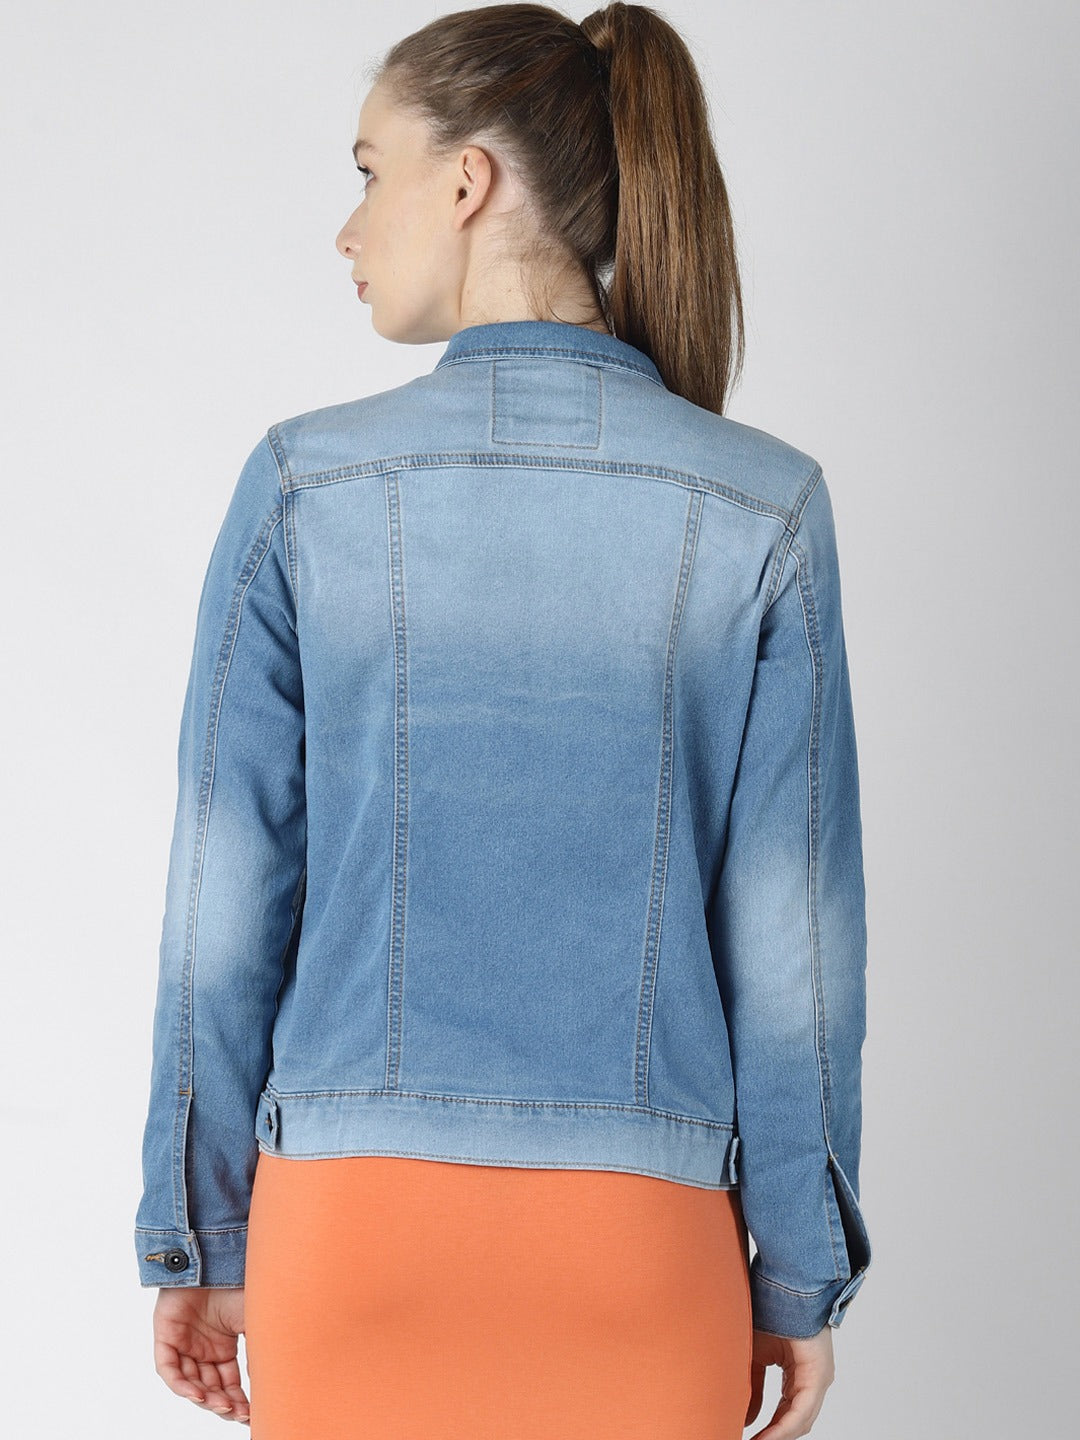 Denim jacket for women, solid blue color, casual and stylish design, perfect for daily wear.